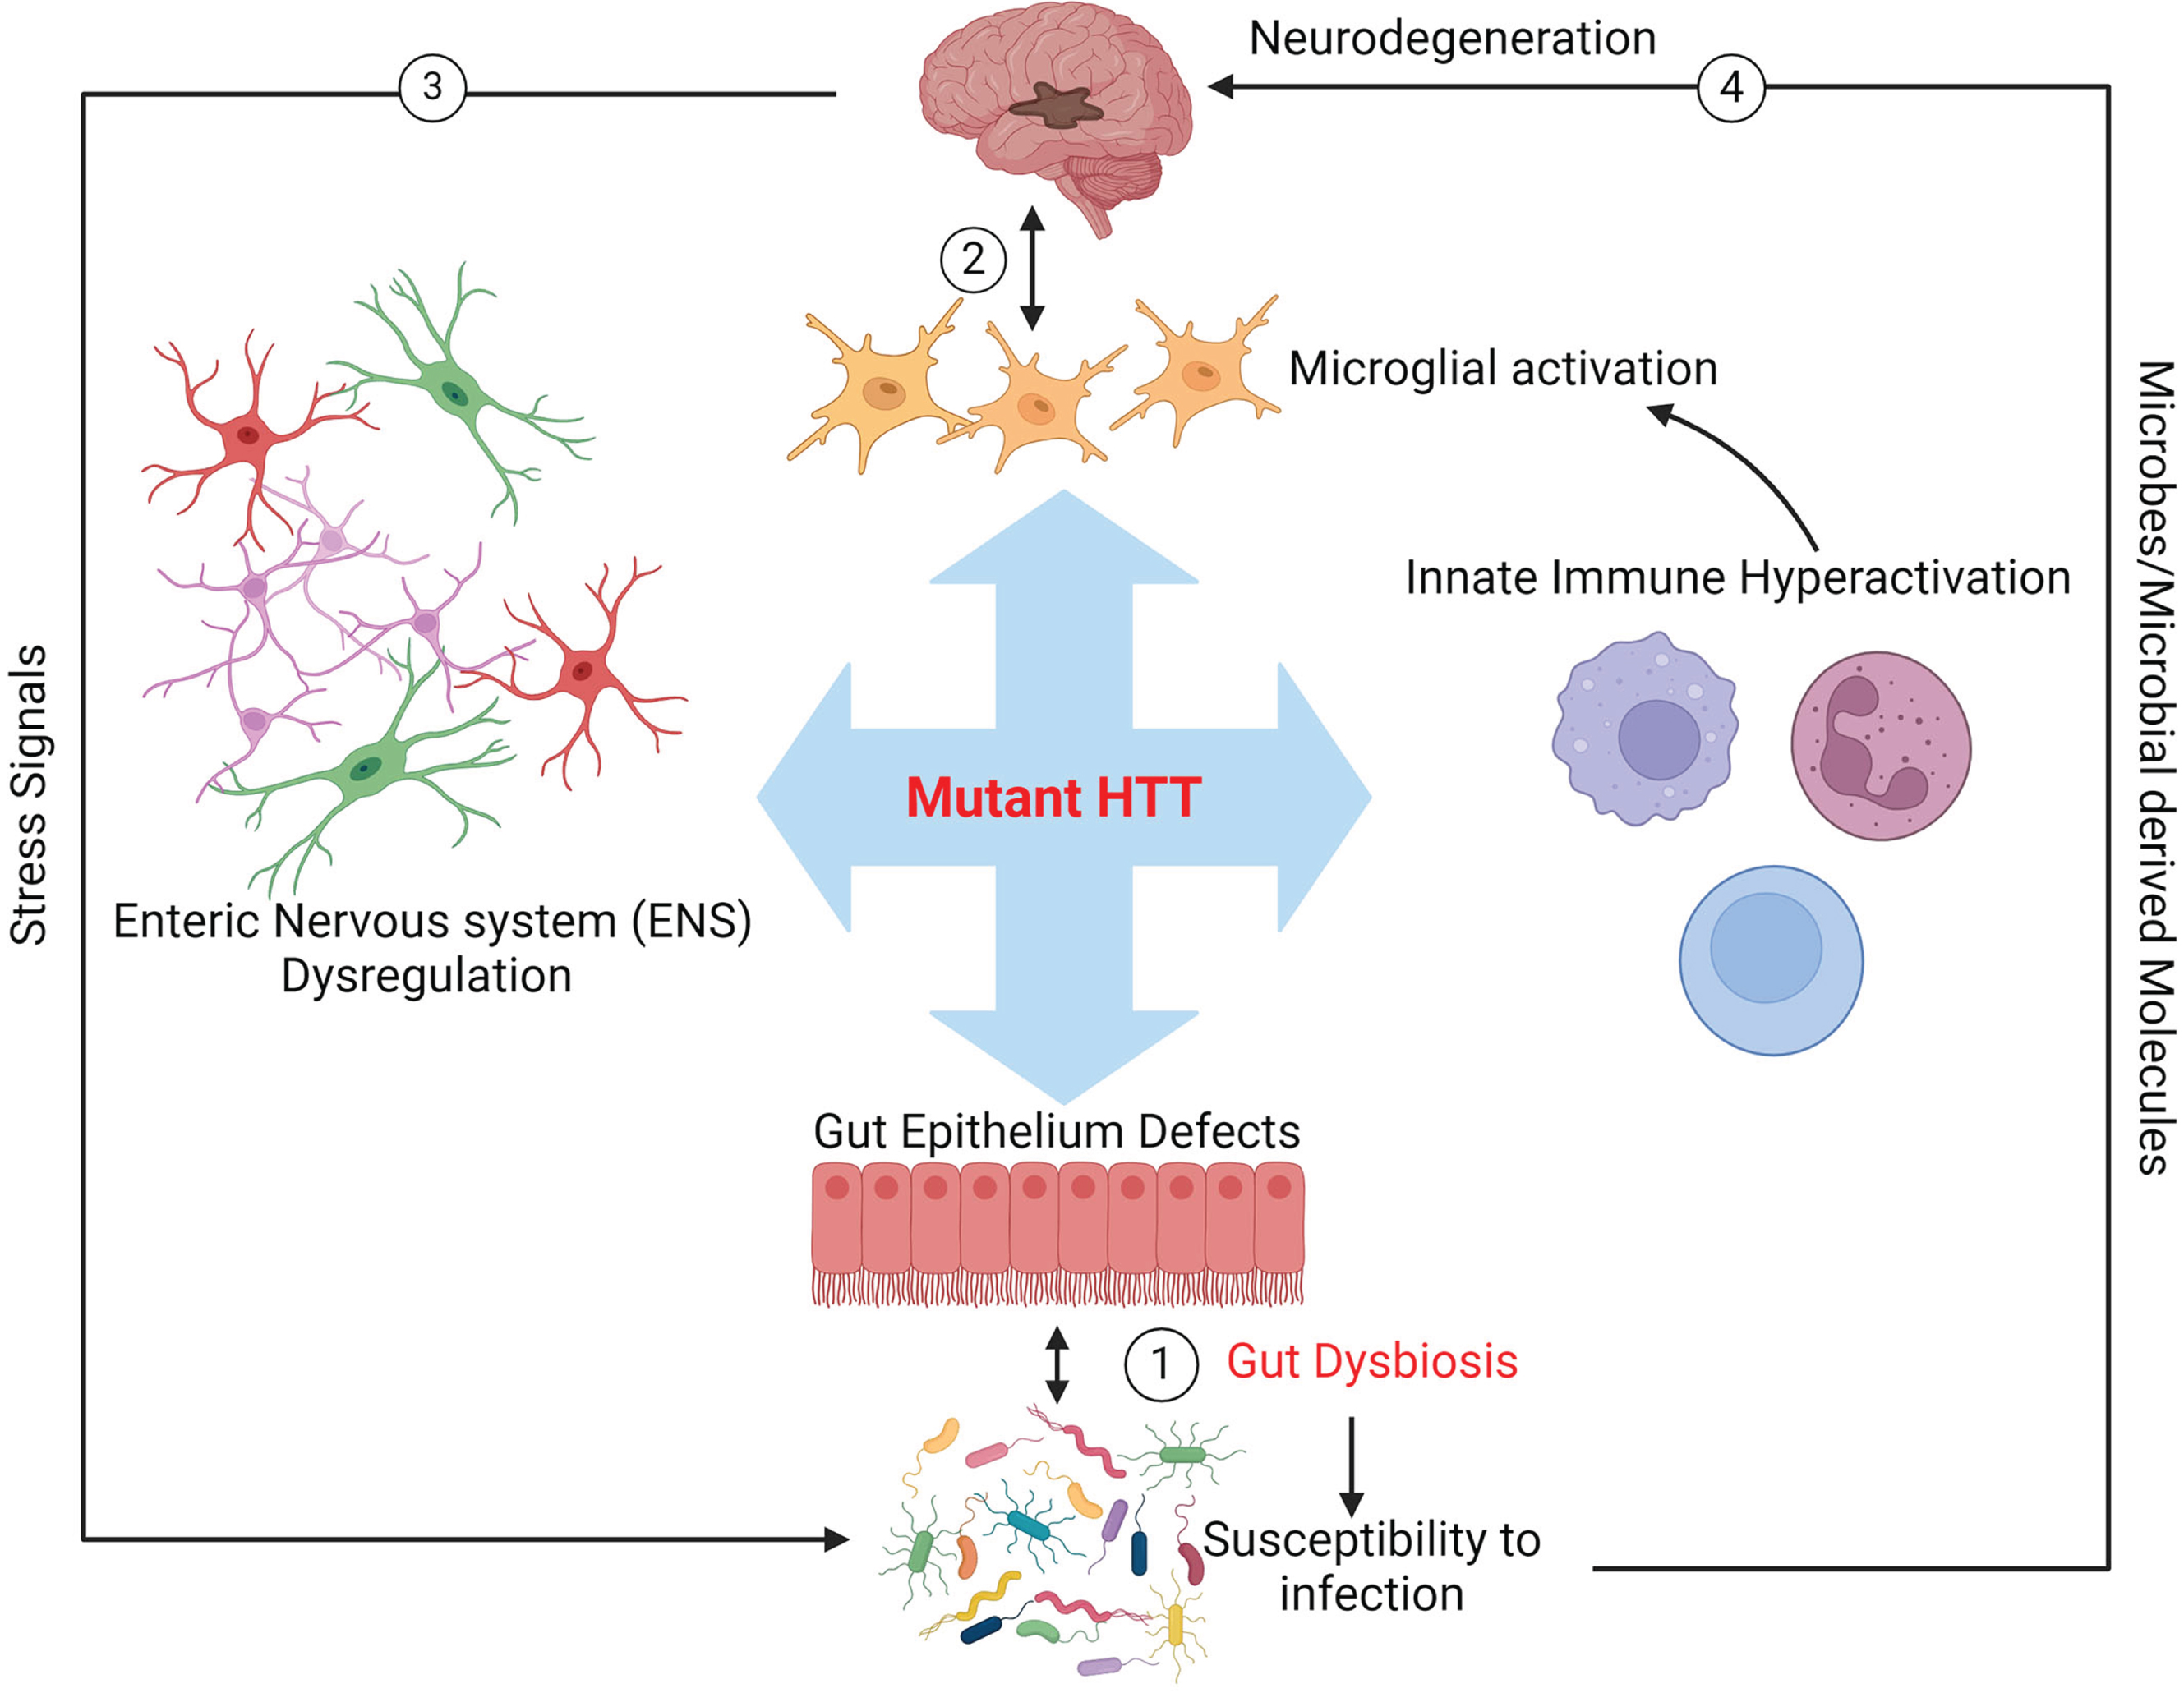 Schematic representation of potential mutant HTT-mediated gut dysbiosis in HD. The toxicity of mHTT may impact the biology of innate immunity, enteric nervous system (ENS), and gut epithelium, leading to aberrant blooming of pathobionts in the gut microbiota and enhancing colonization of pathogens (dysbiosis, arrow 1). Dysbiosis may in turn cause a feedback loop further exacerbating the toxic effects of mHTT in these organs and ultimately promoting neurodegeneration in the brain (arrow 2). Signals from stressed neurons in the CNS may also cause gut dysbiosis in HD (arrow 3). Furthermore, gut microbes and or microbial compounds produced in the gut could affect brain health directly (arrow 4).